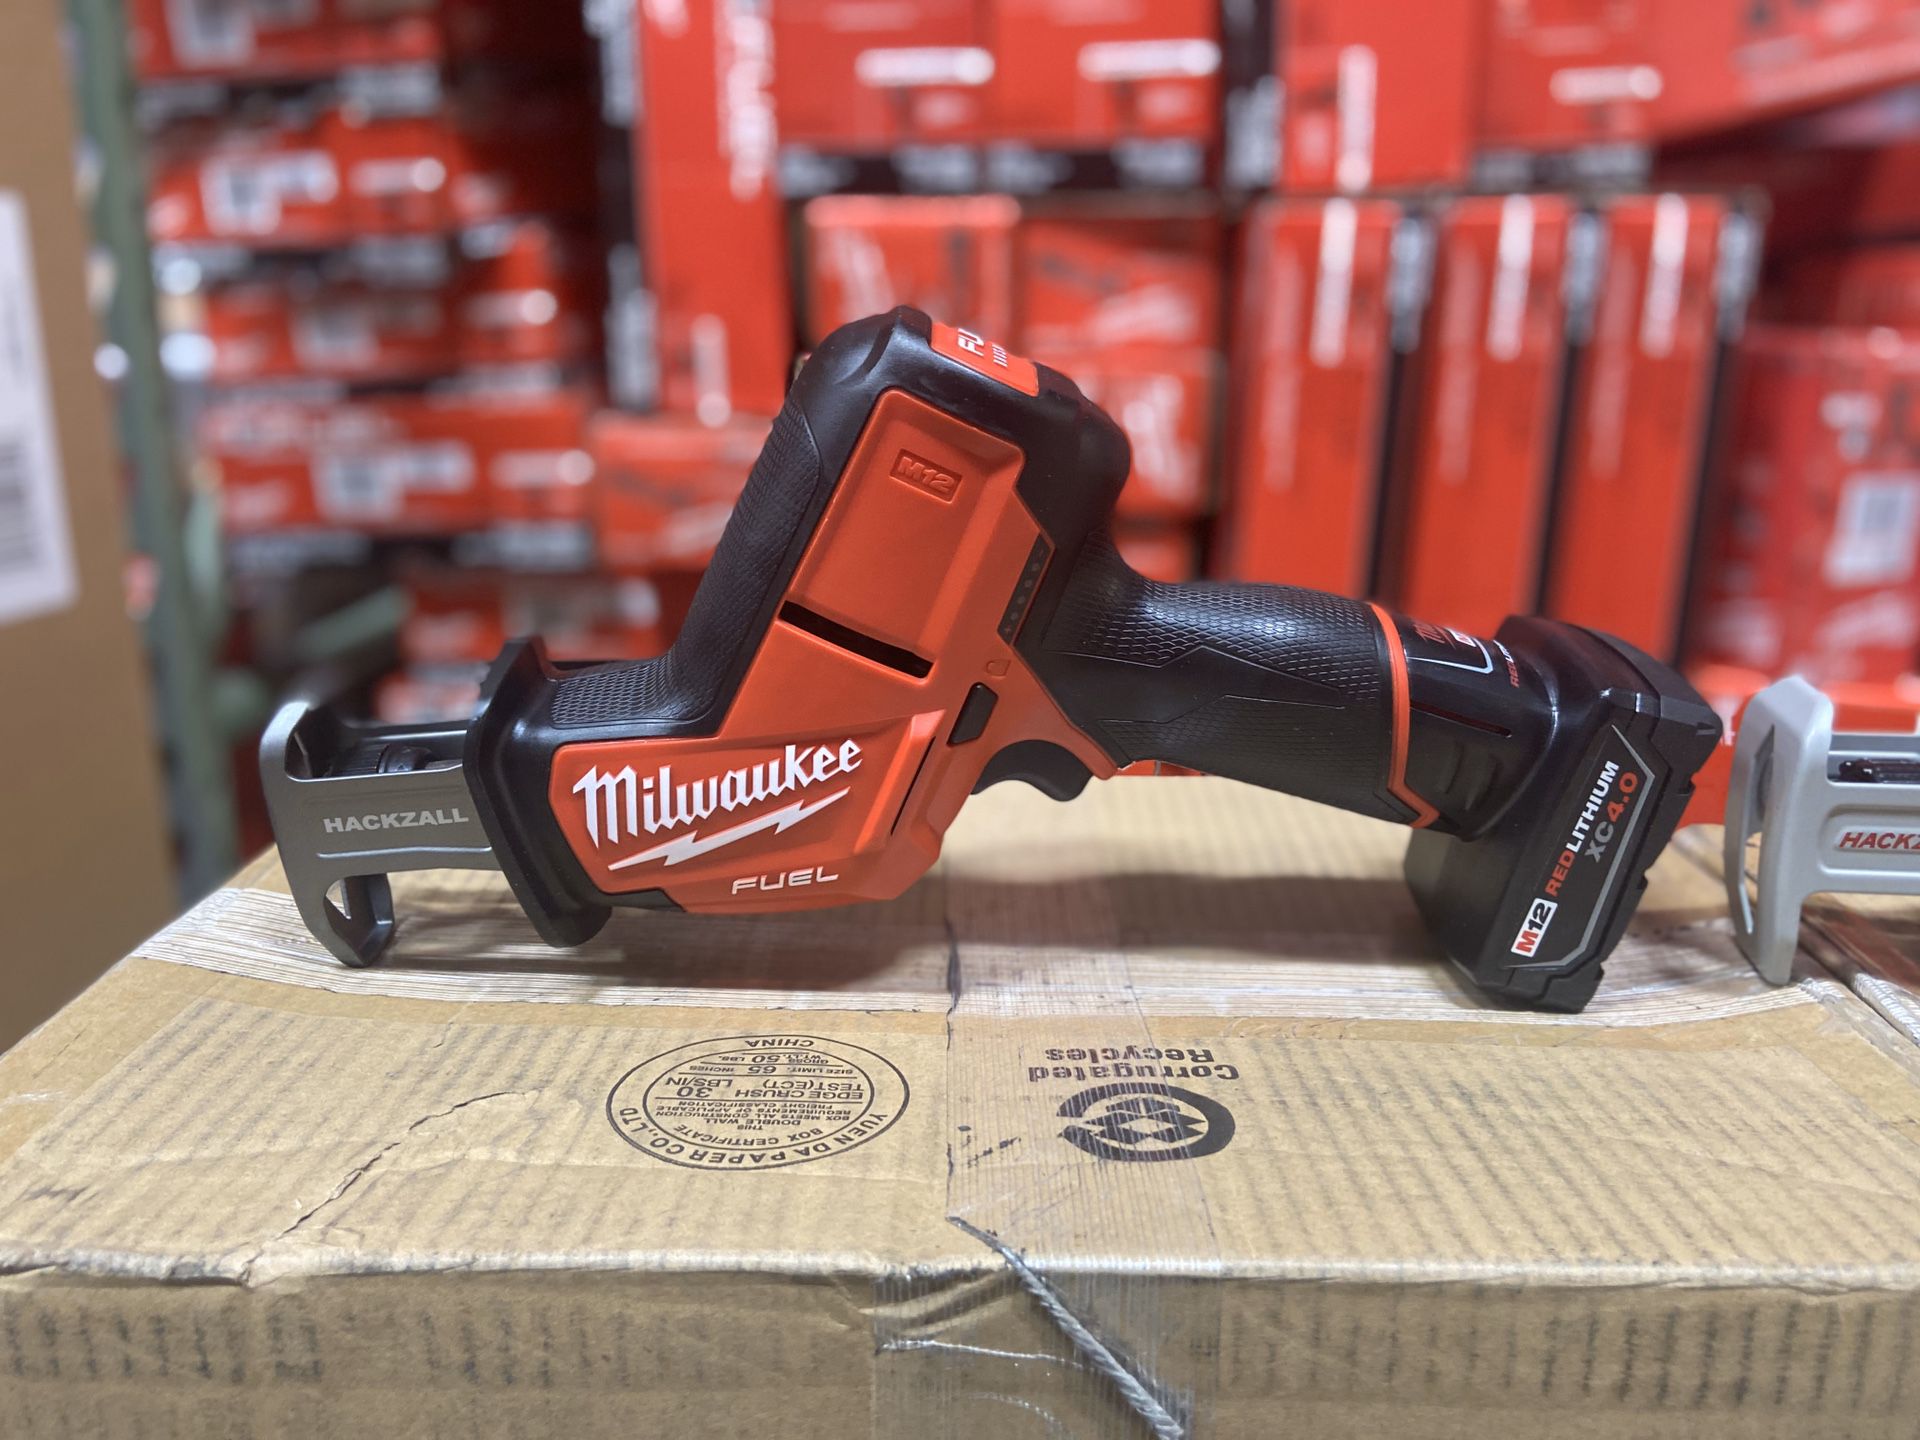 Brand new m12 milwaukee fuel hackzall 2520-20 with a 4.0 battery